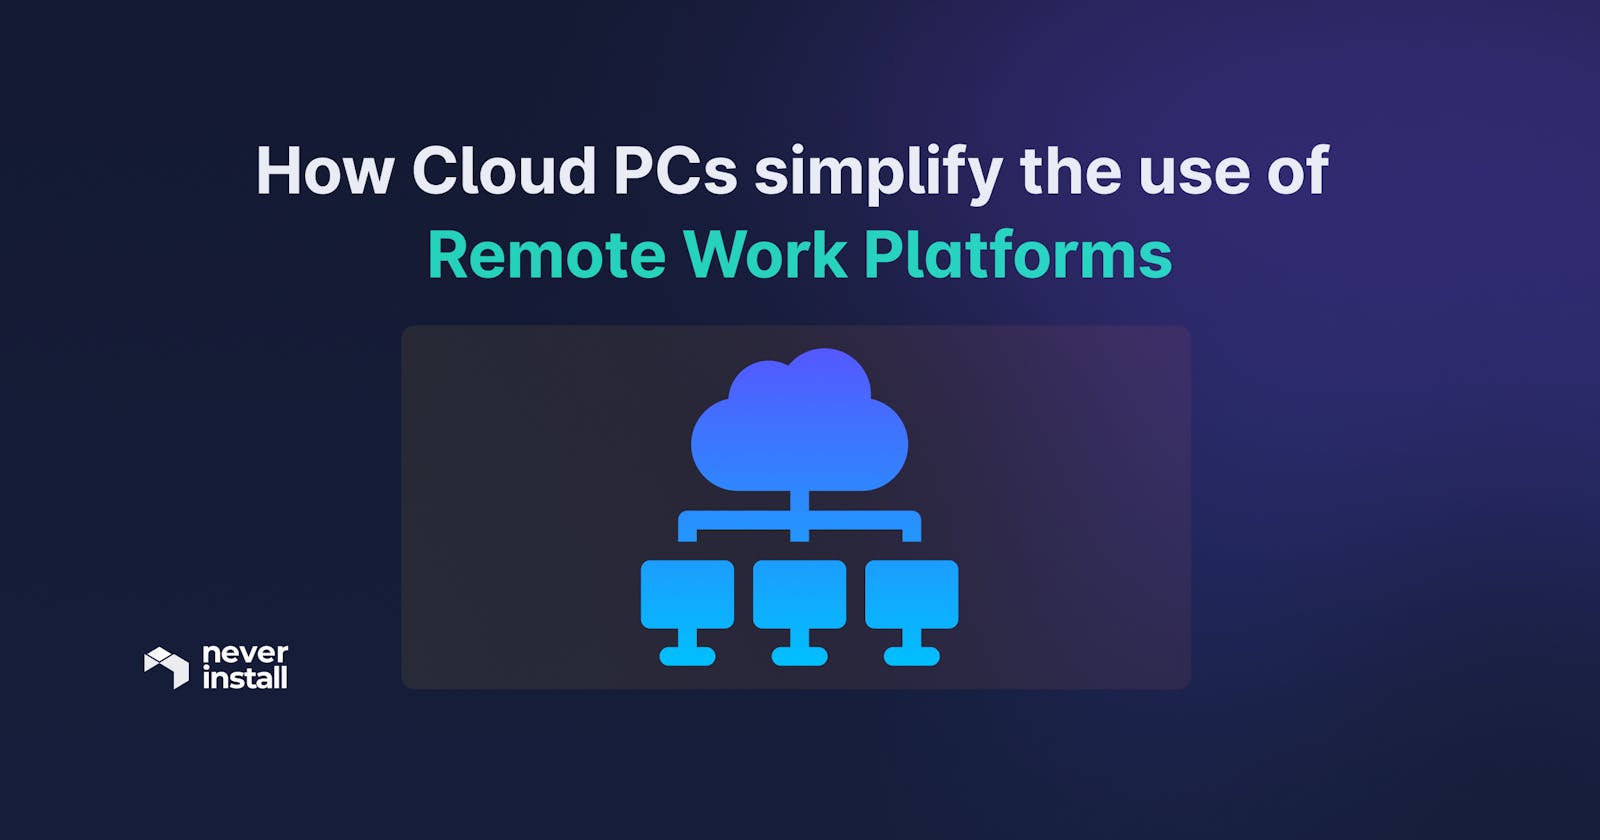 How Cloud PCs simplify the use of Remote Work Platforms